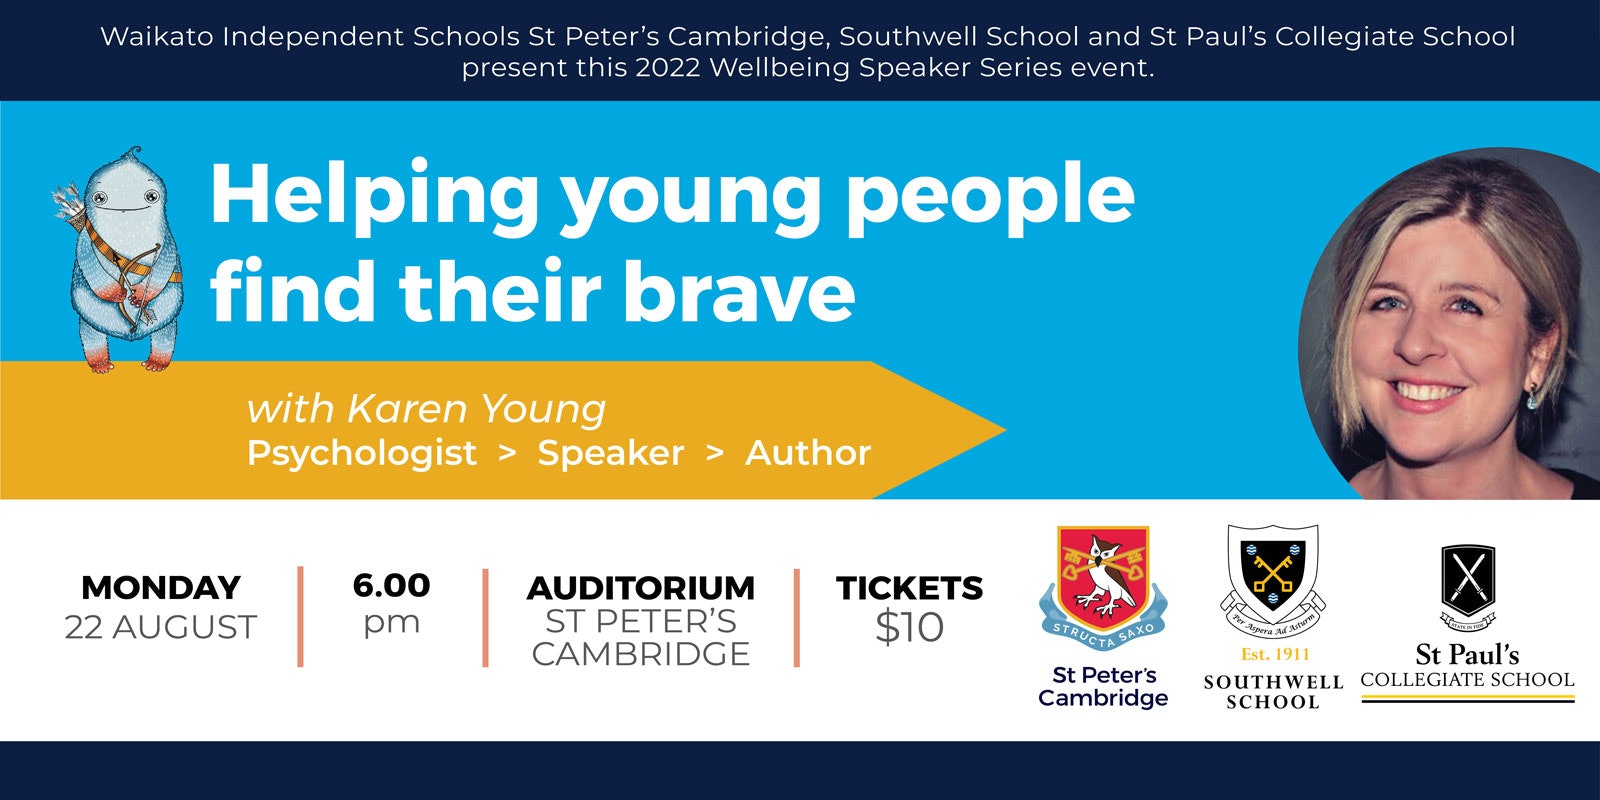 Helping young people find their brave